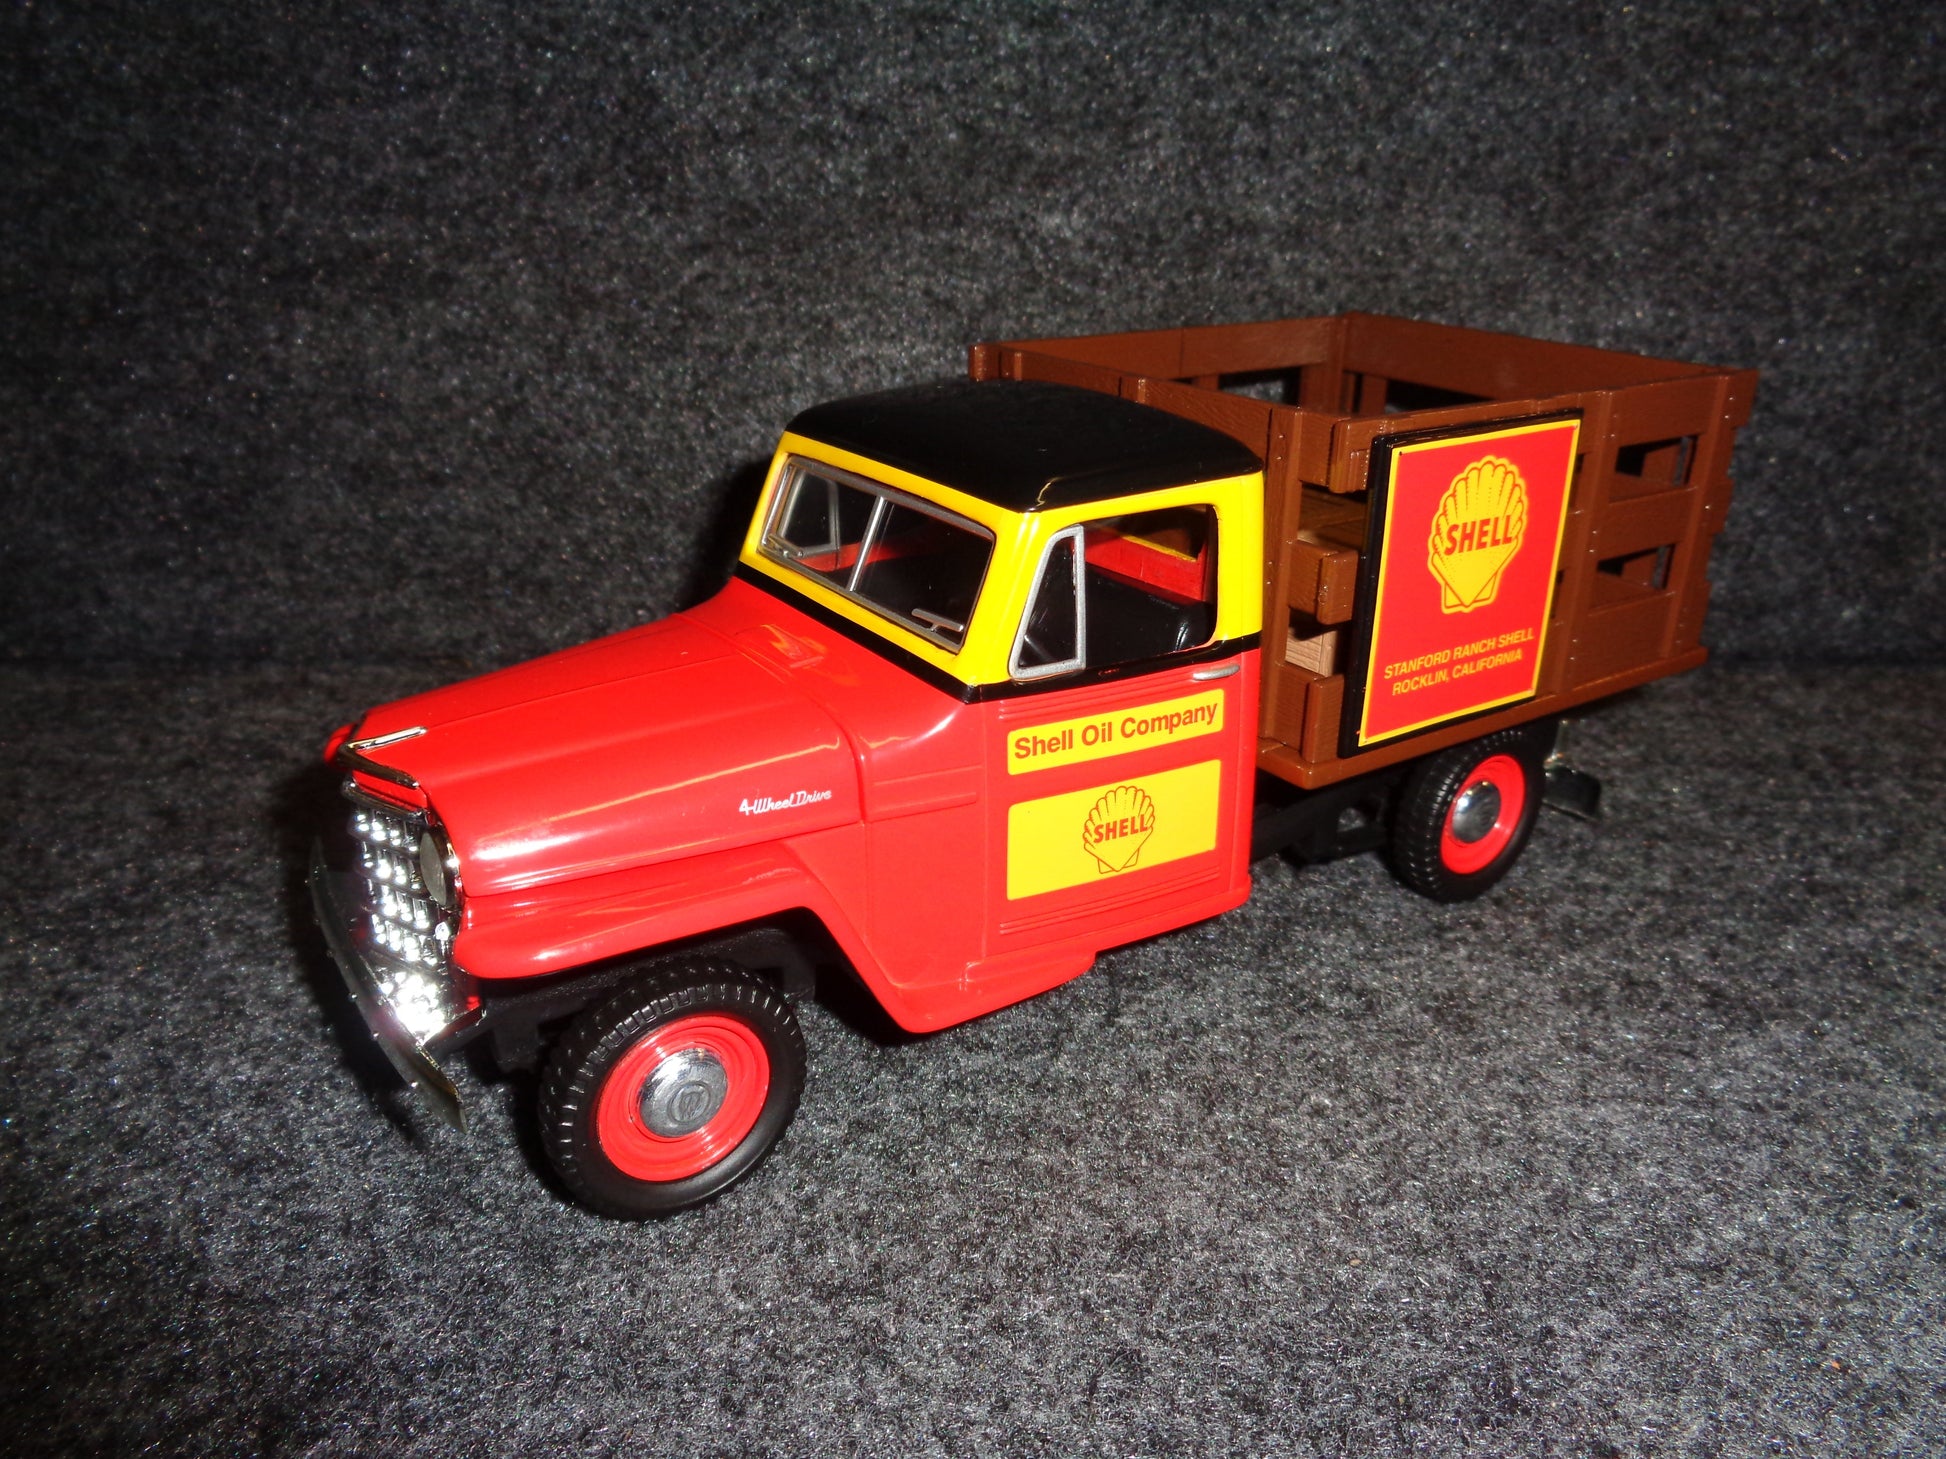 Shell Oil Company 1953 Willys Jeep Stake Bed Truck